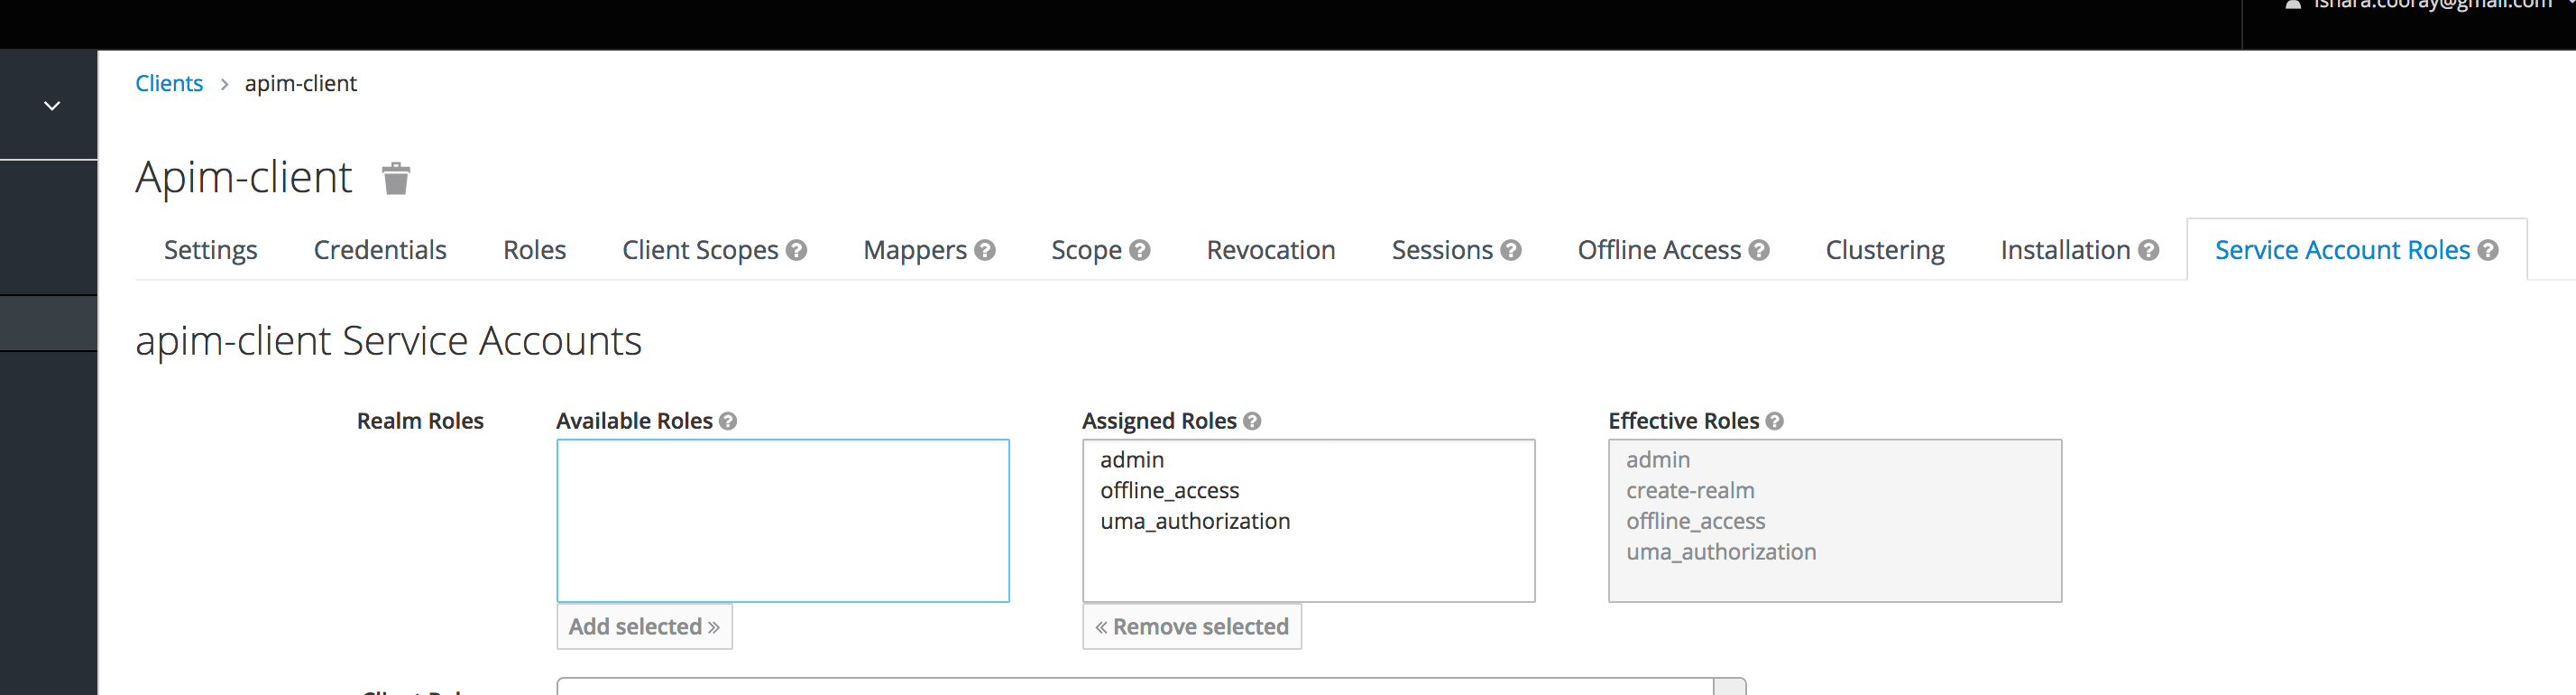 Assign service account roles